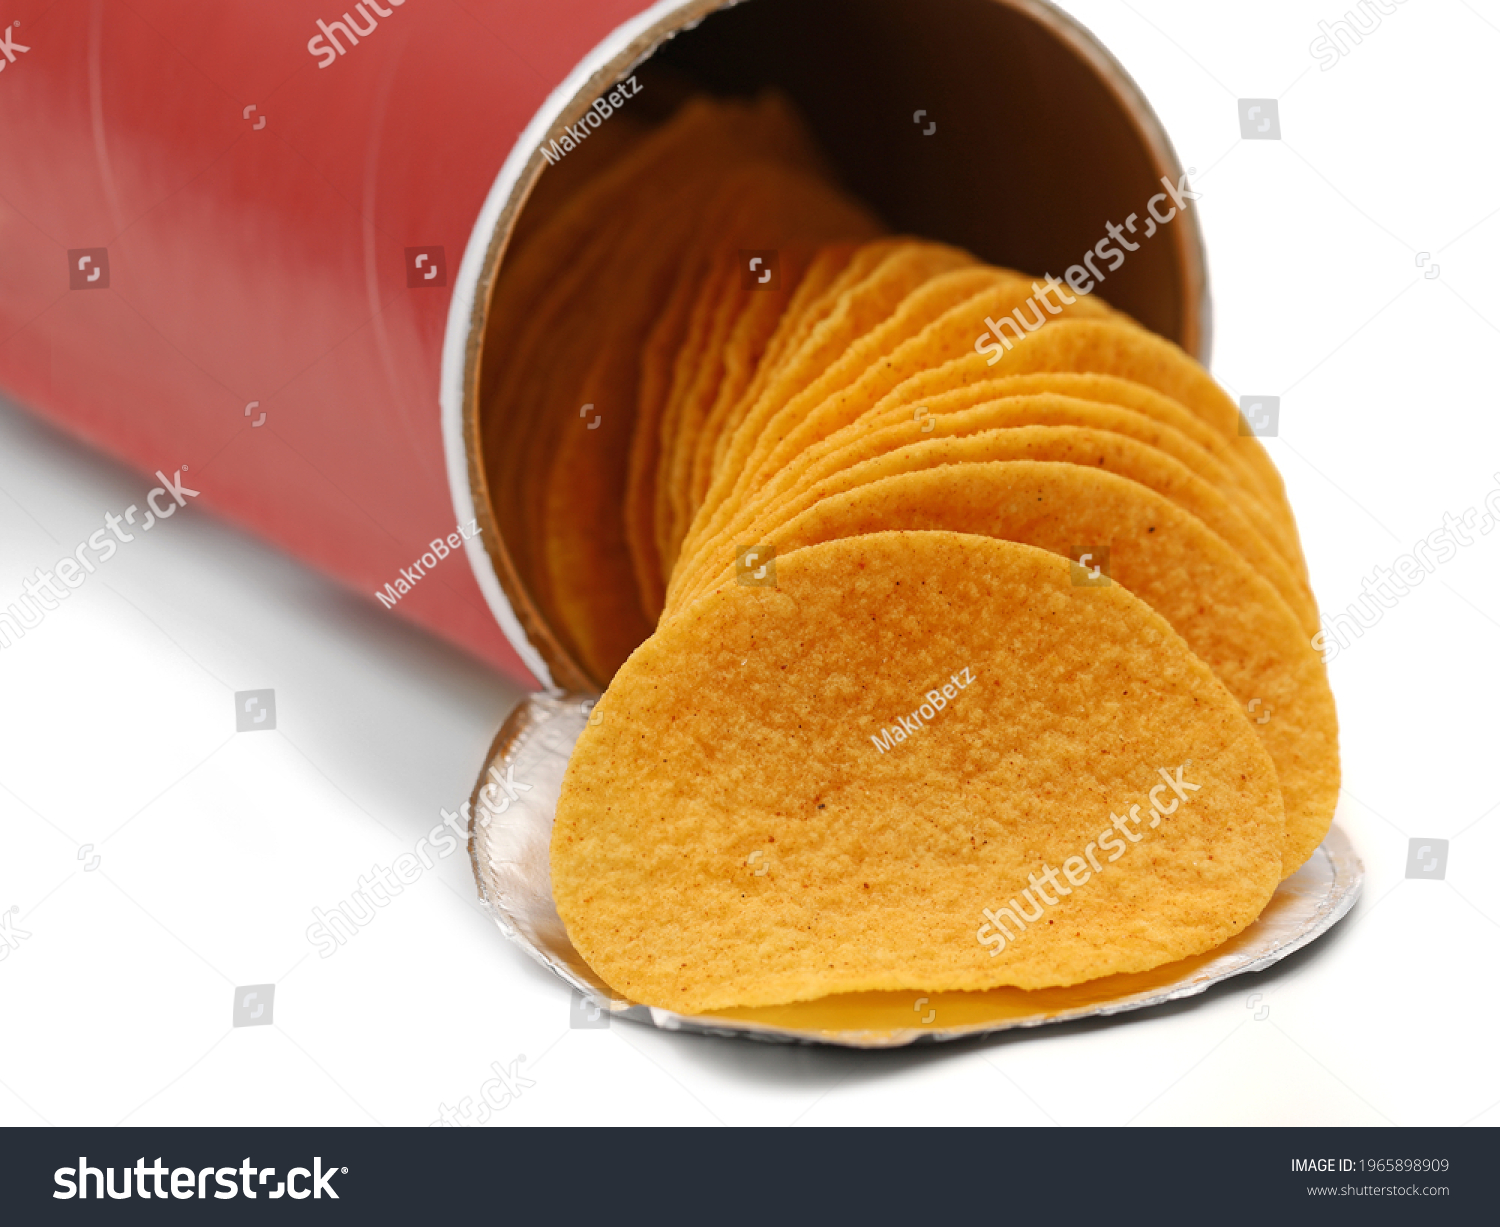 stacked crisps falling out from red cardboard tube, paprika flavoured potato chips in can isolated on white background #1965898909